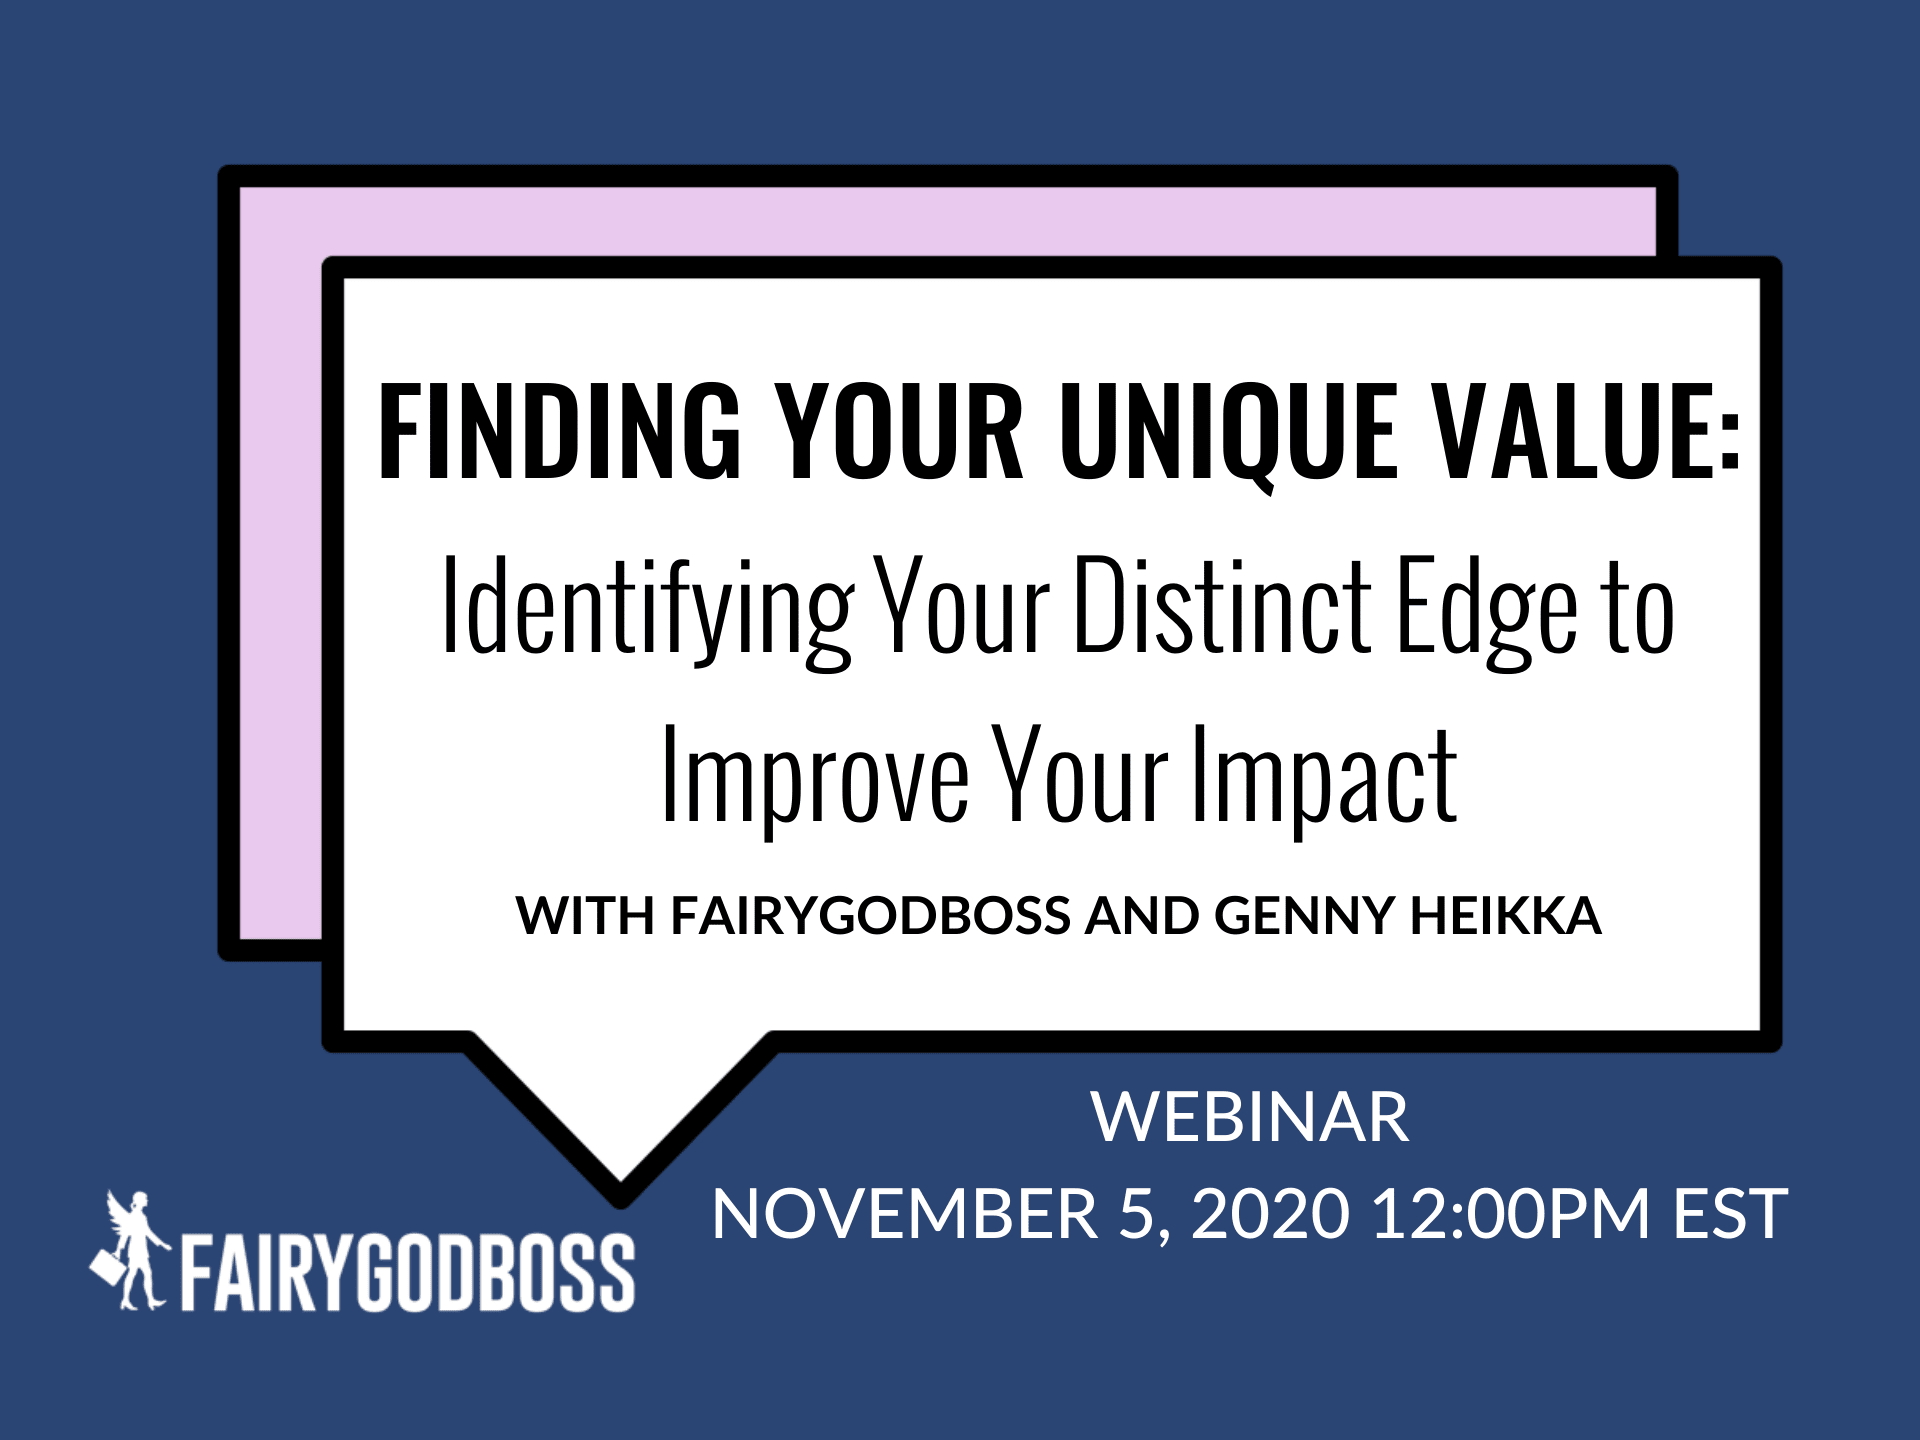 Finding Your Unique Value: Identifying Your Distinct Edge to Improve Your Impact